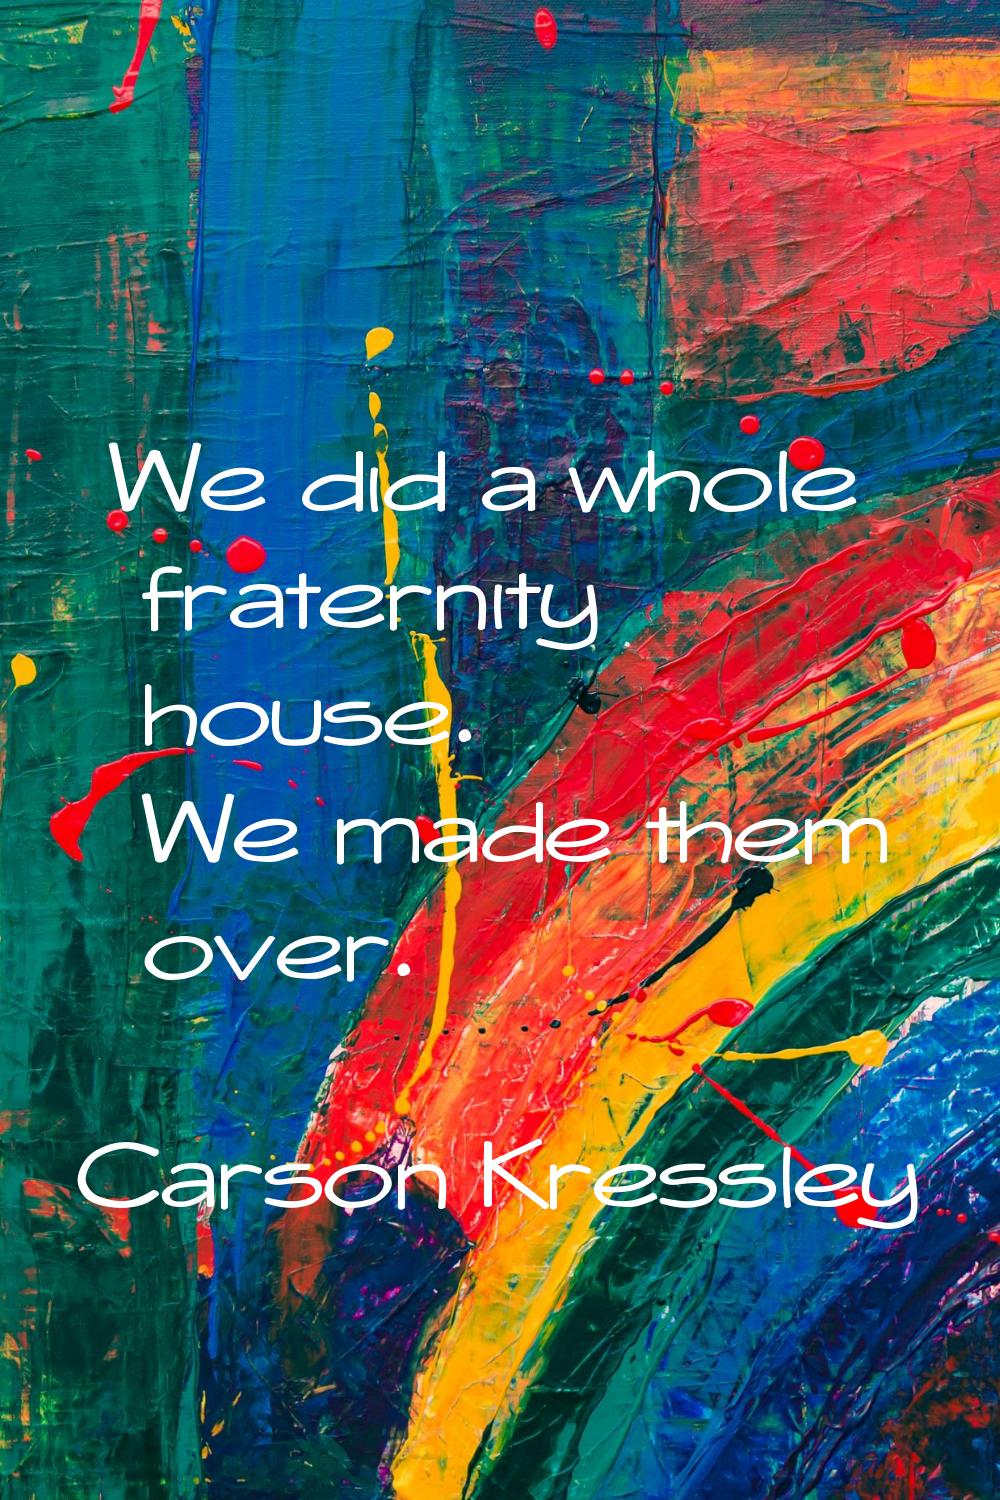 We did a whole fraternity house. We made them over.